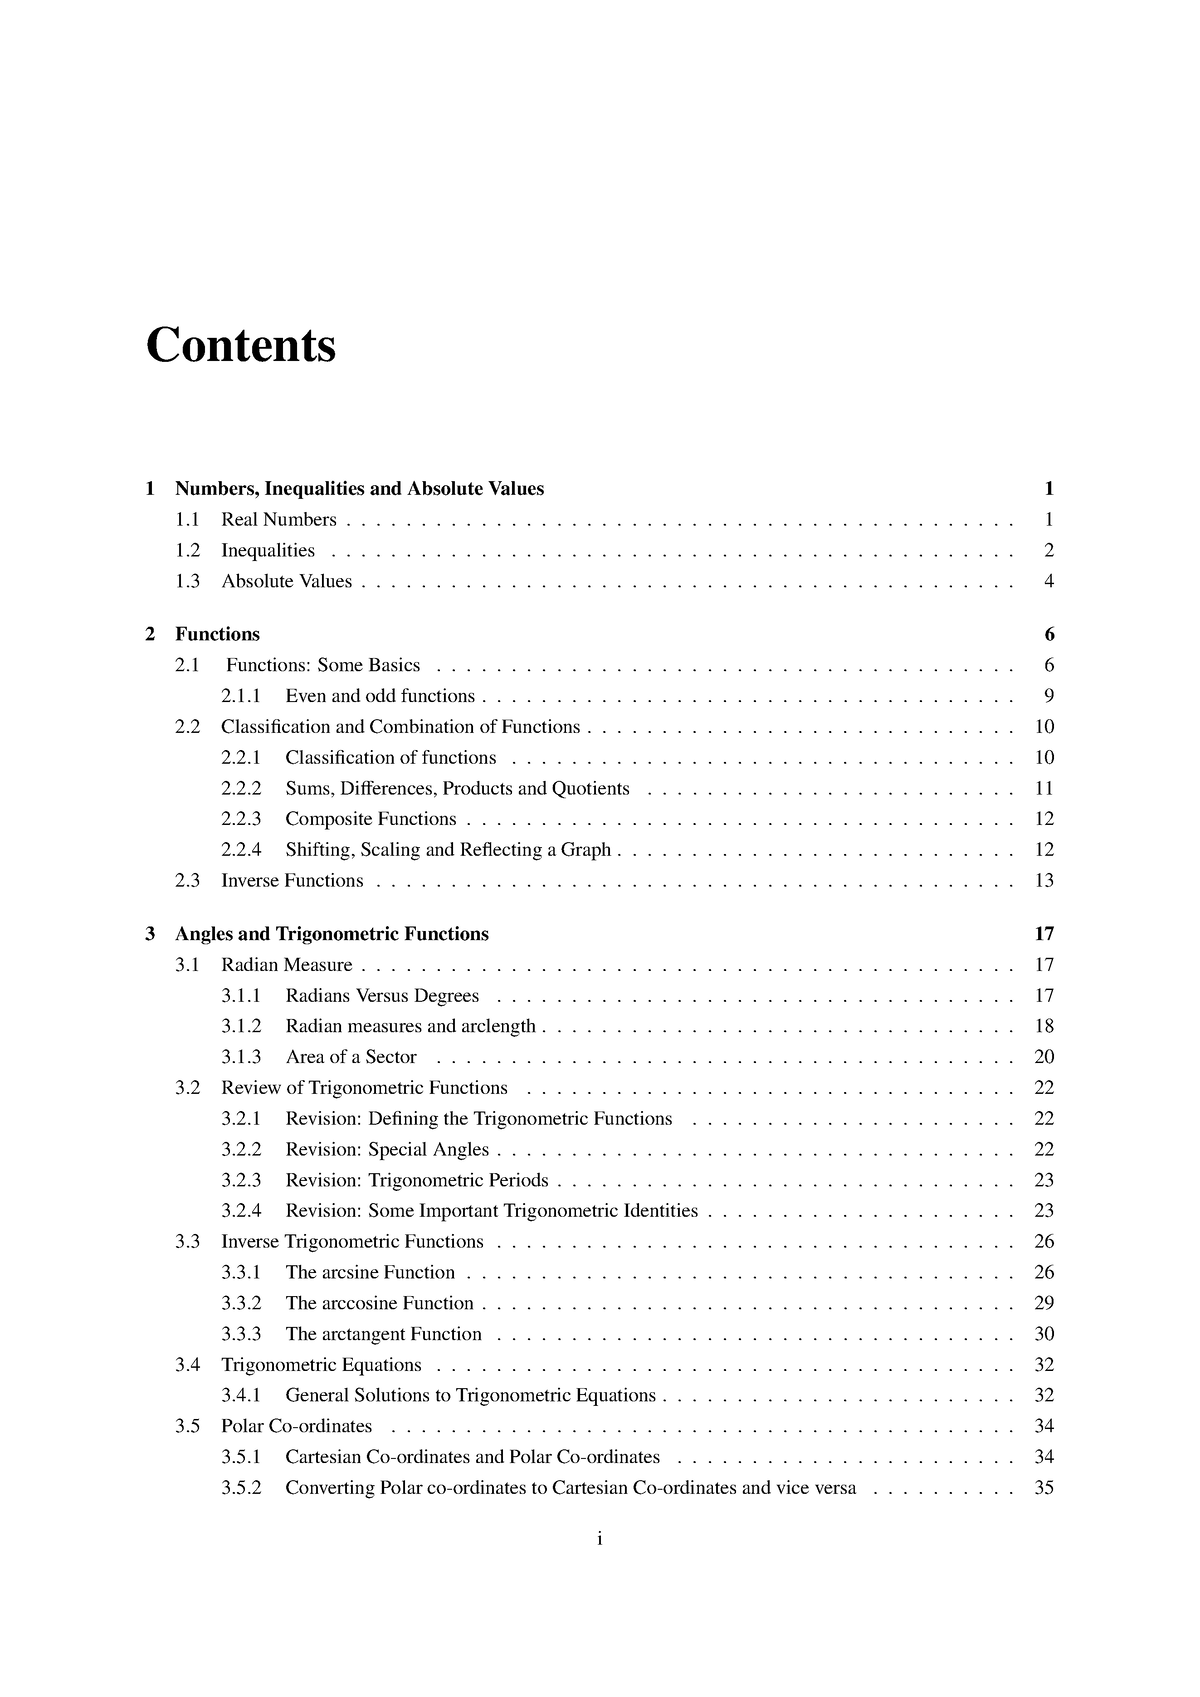 math1034-study-guide-contents-a-some-basic-mathematical-notions-a-a